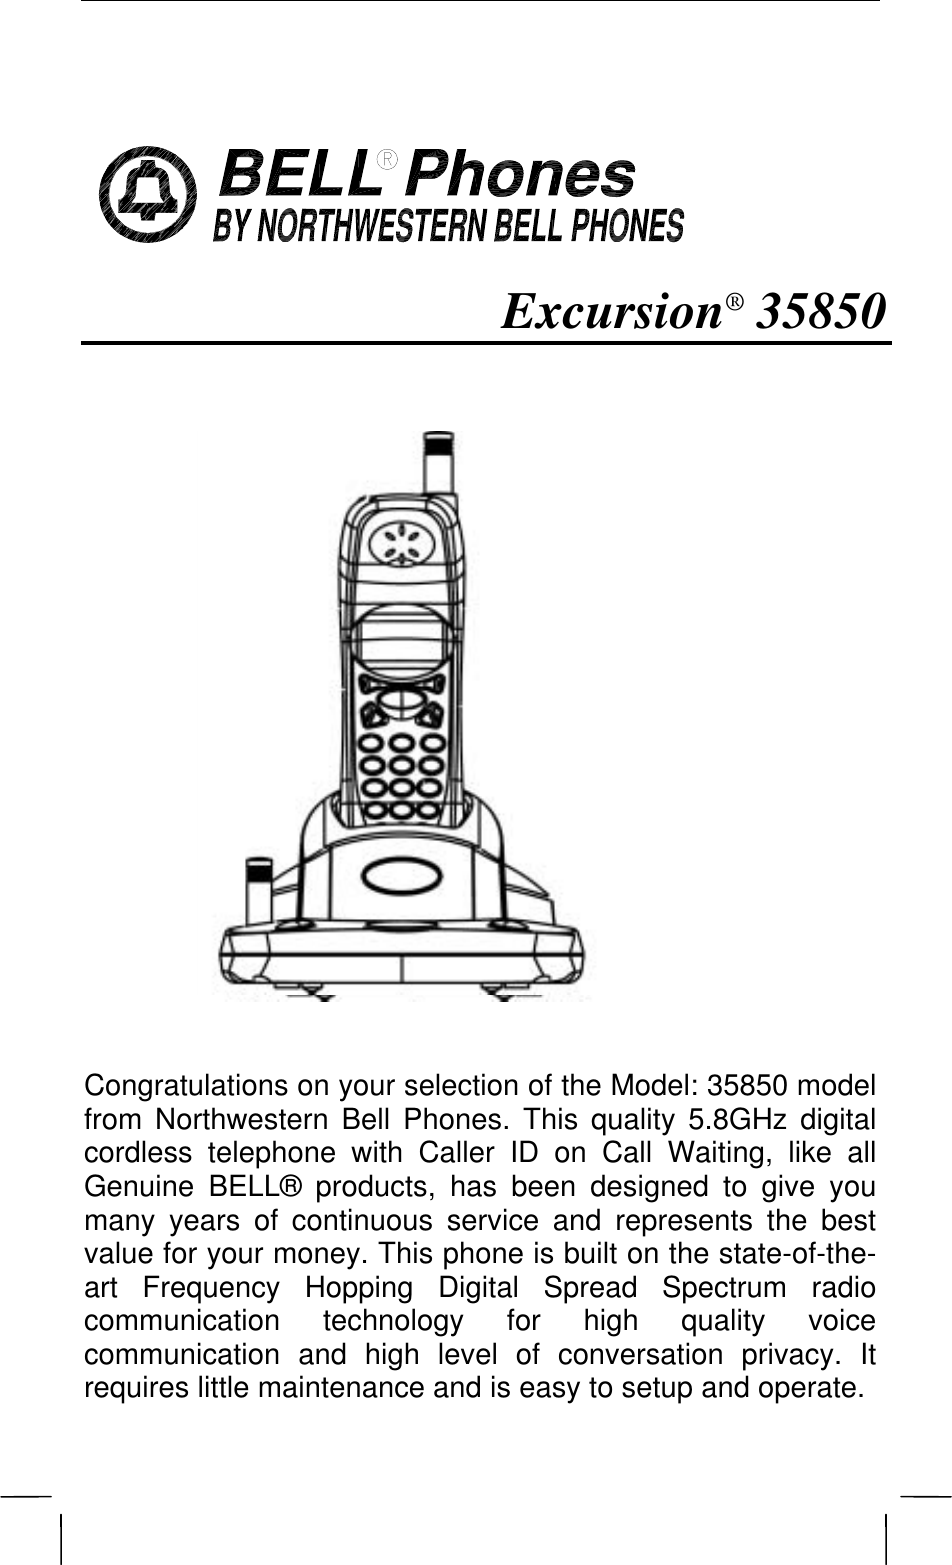                  Excursion® 35850                Congratulations on your selection of the Model: 35850 model from Northwestern Bell Phones. This quality 5.8GHz digital cordless telephone with Caller ID on Call Waiting, like all Genuine BELL® products, has been designed to give you many years of continuous service and represents the best value for your money. This phone is built on the state-of-the-art Frequency Hopping Digital Spread Spectrum radio communication technology for high quality voice communication and high level of conversation privacy. It requires little maintenance and is easy to setup and operate.  